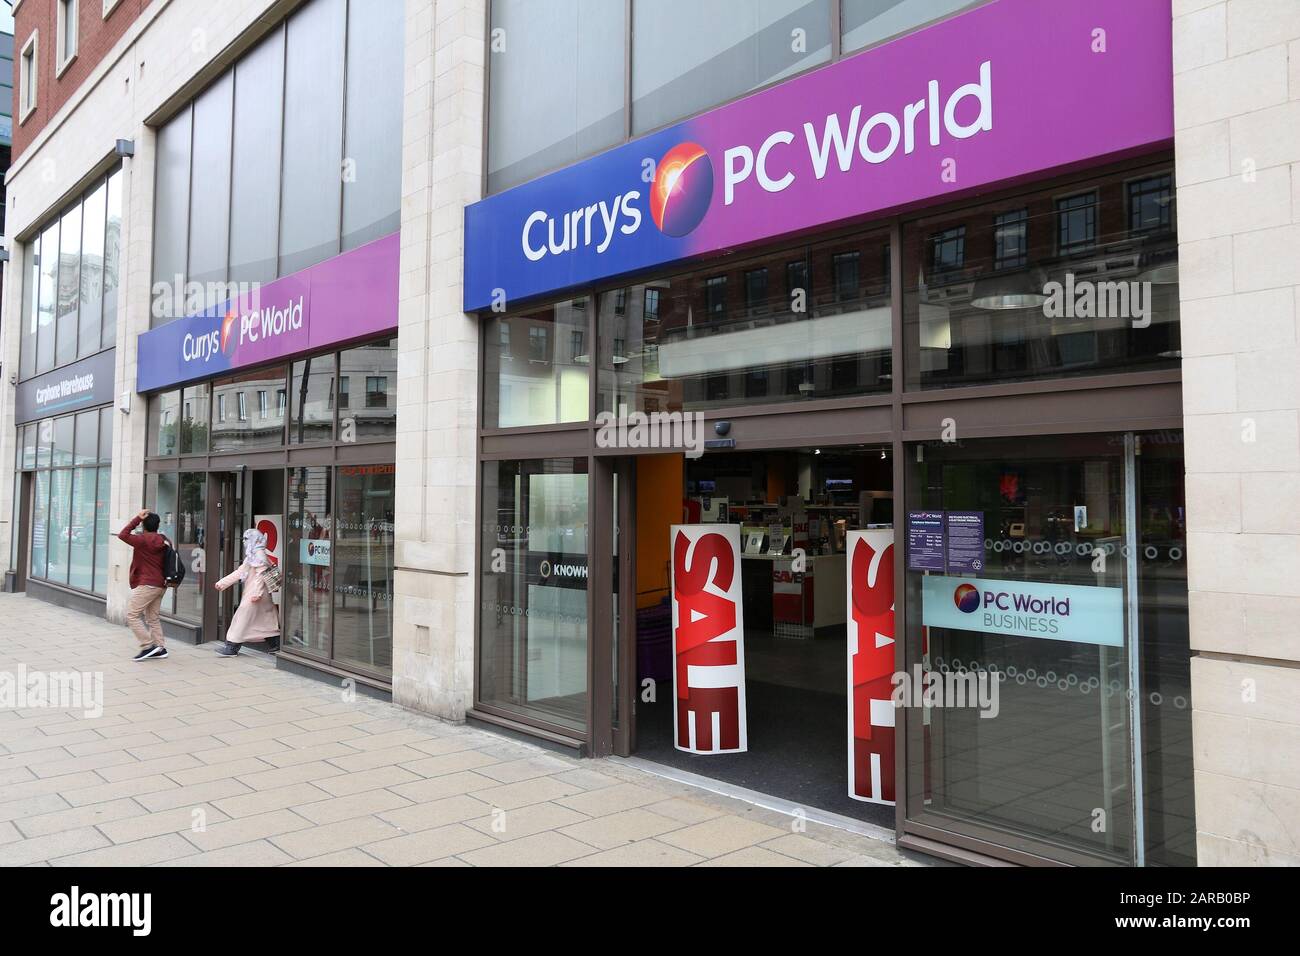 LEEDS, UK - JULY 12, 2016: People walk by Currys PC World computer shop in Leeds, UK. The store chain is owned by Dixons Carphone, a British group. Stock Photo